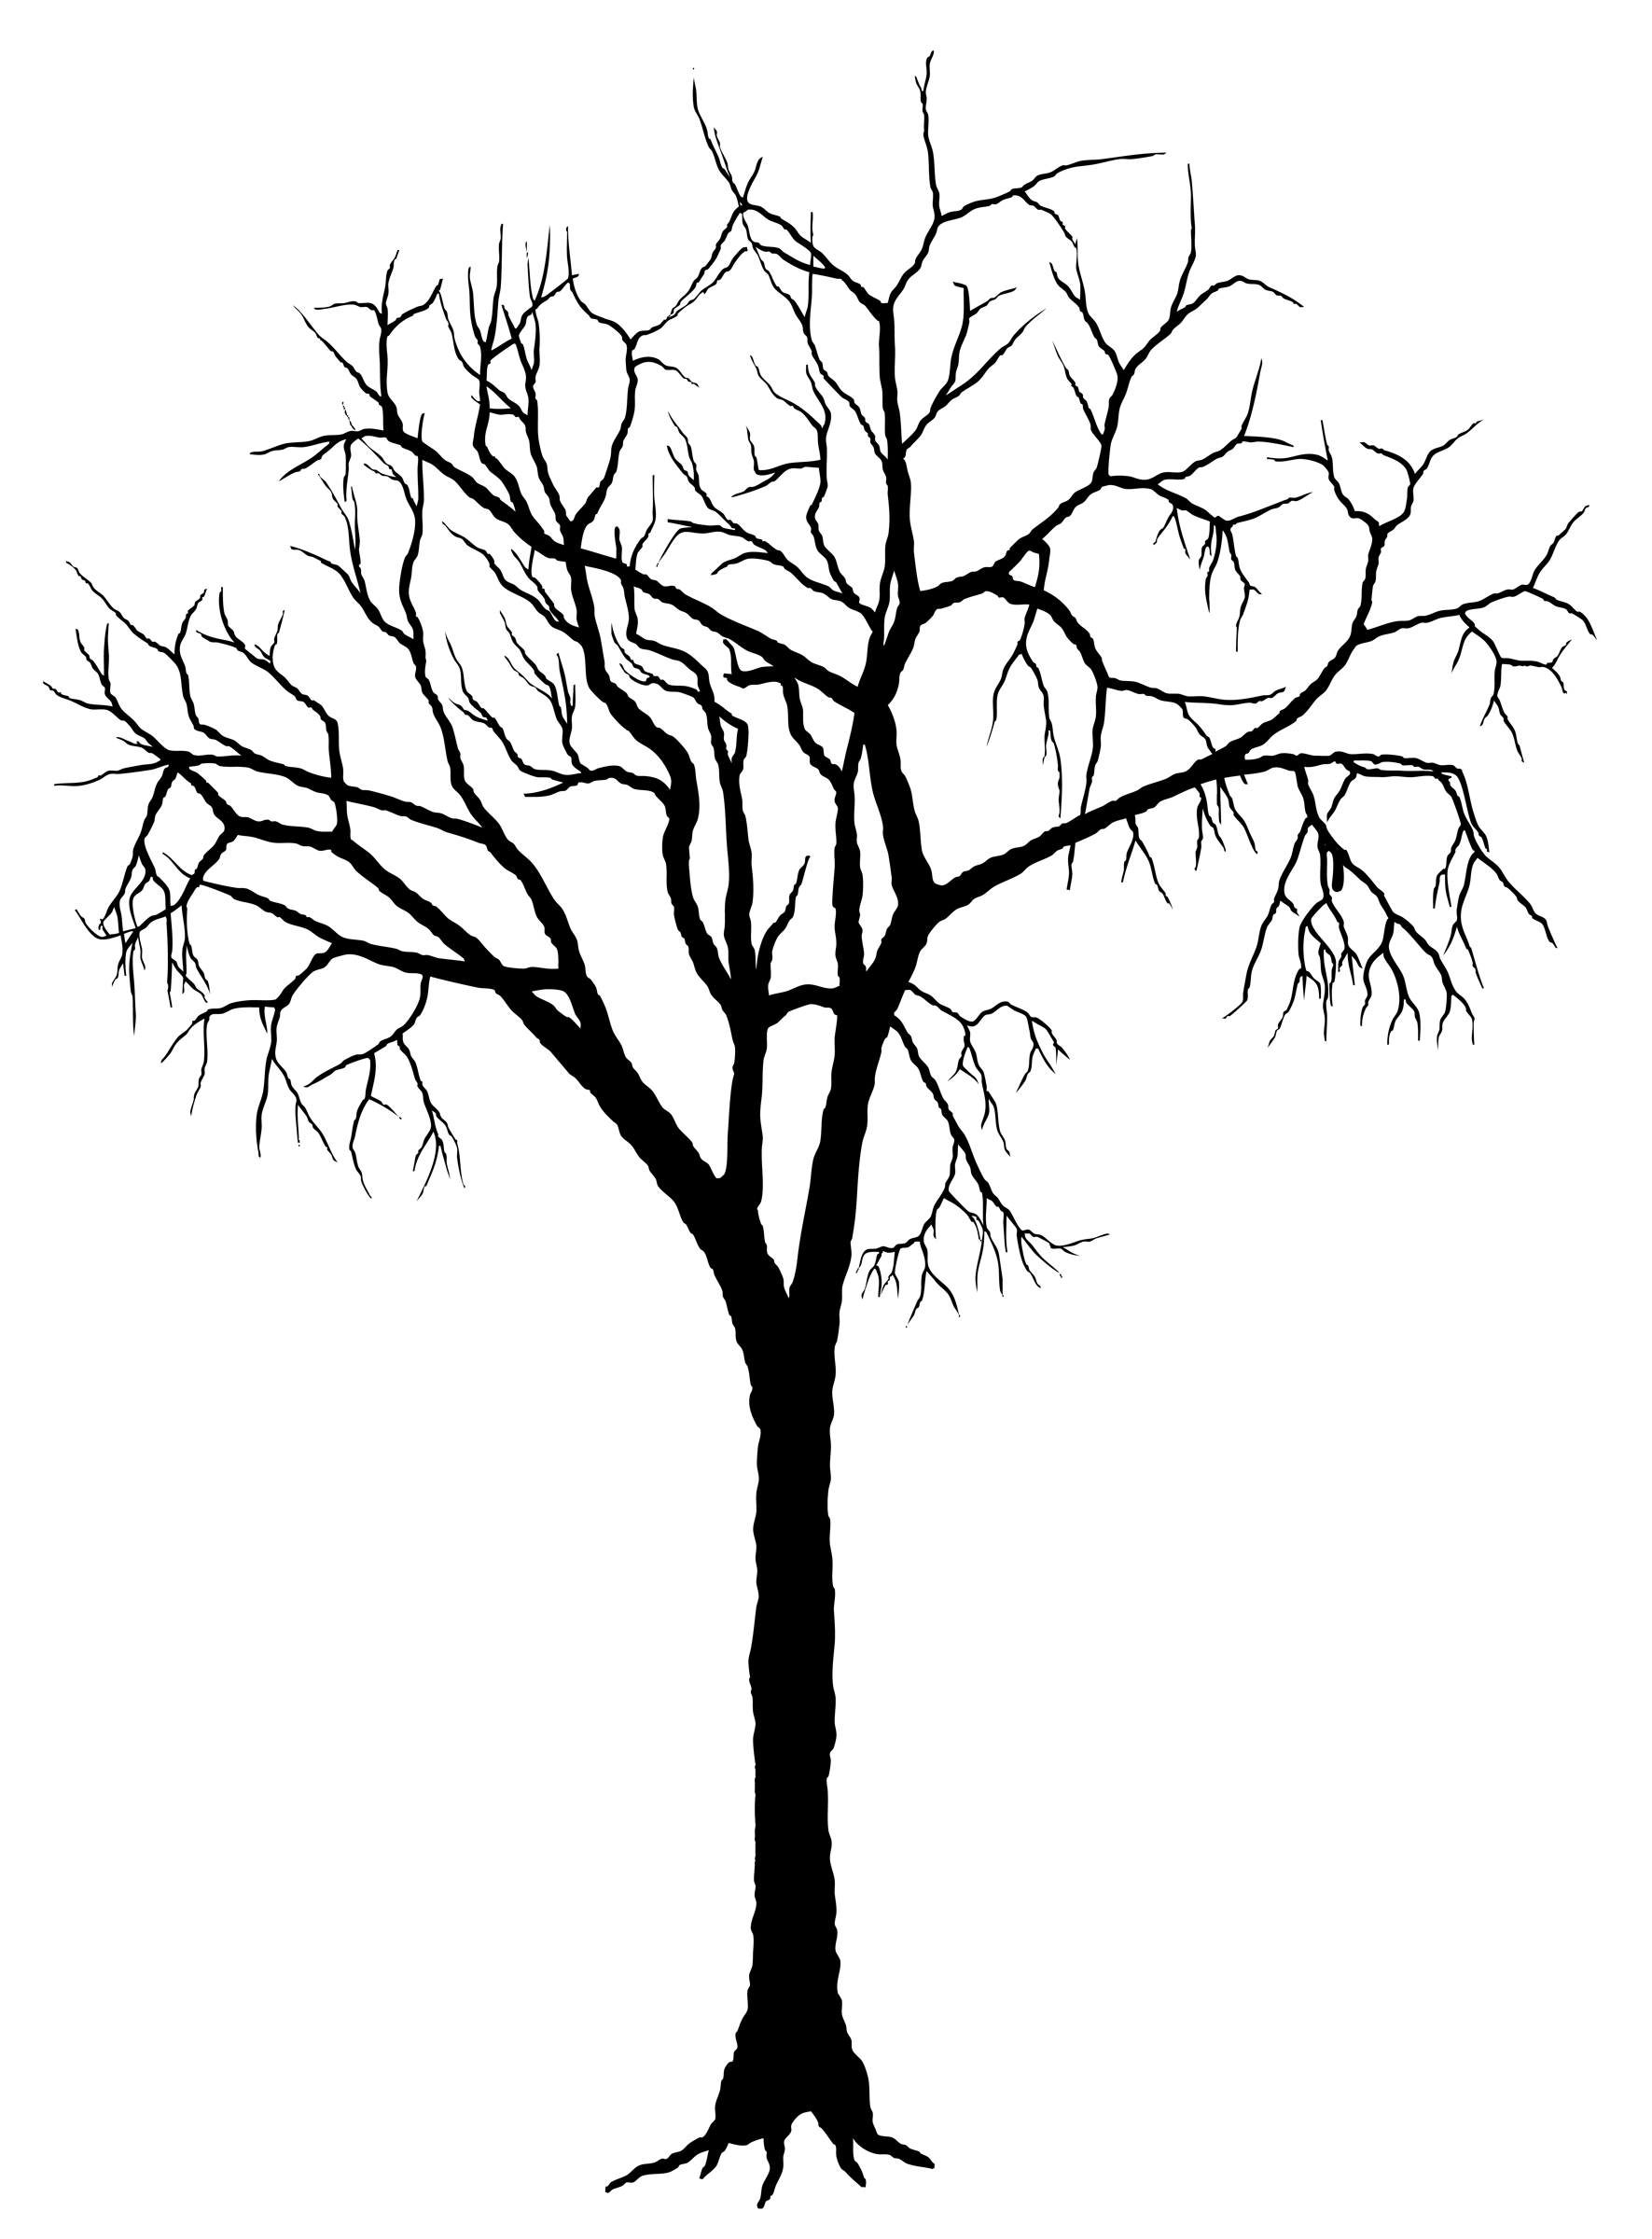 Tree silhouette clipart png